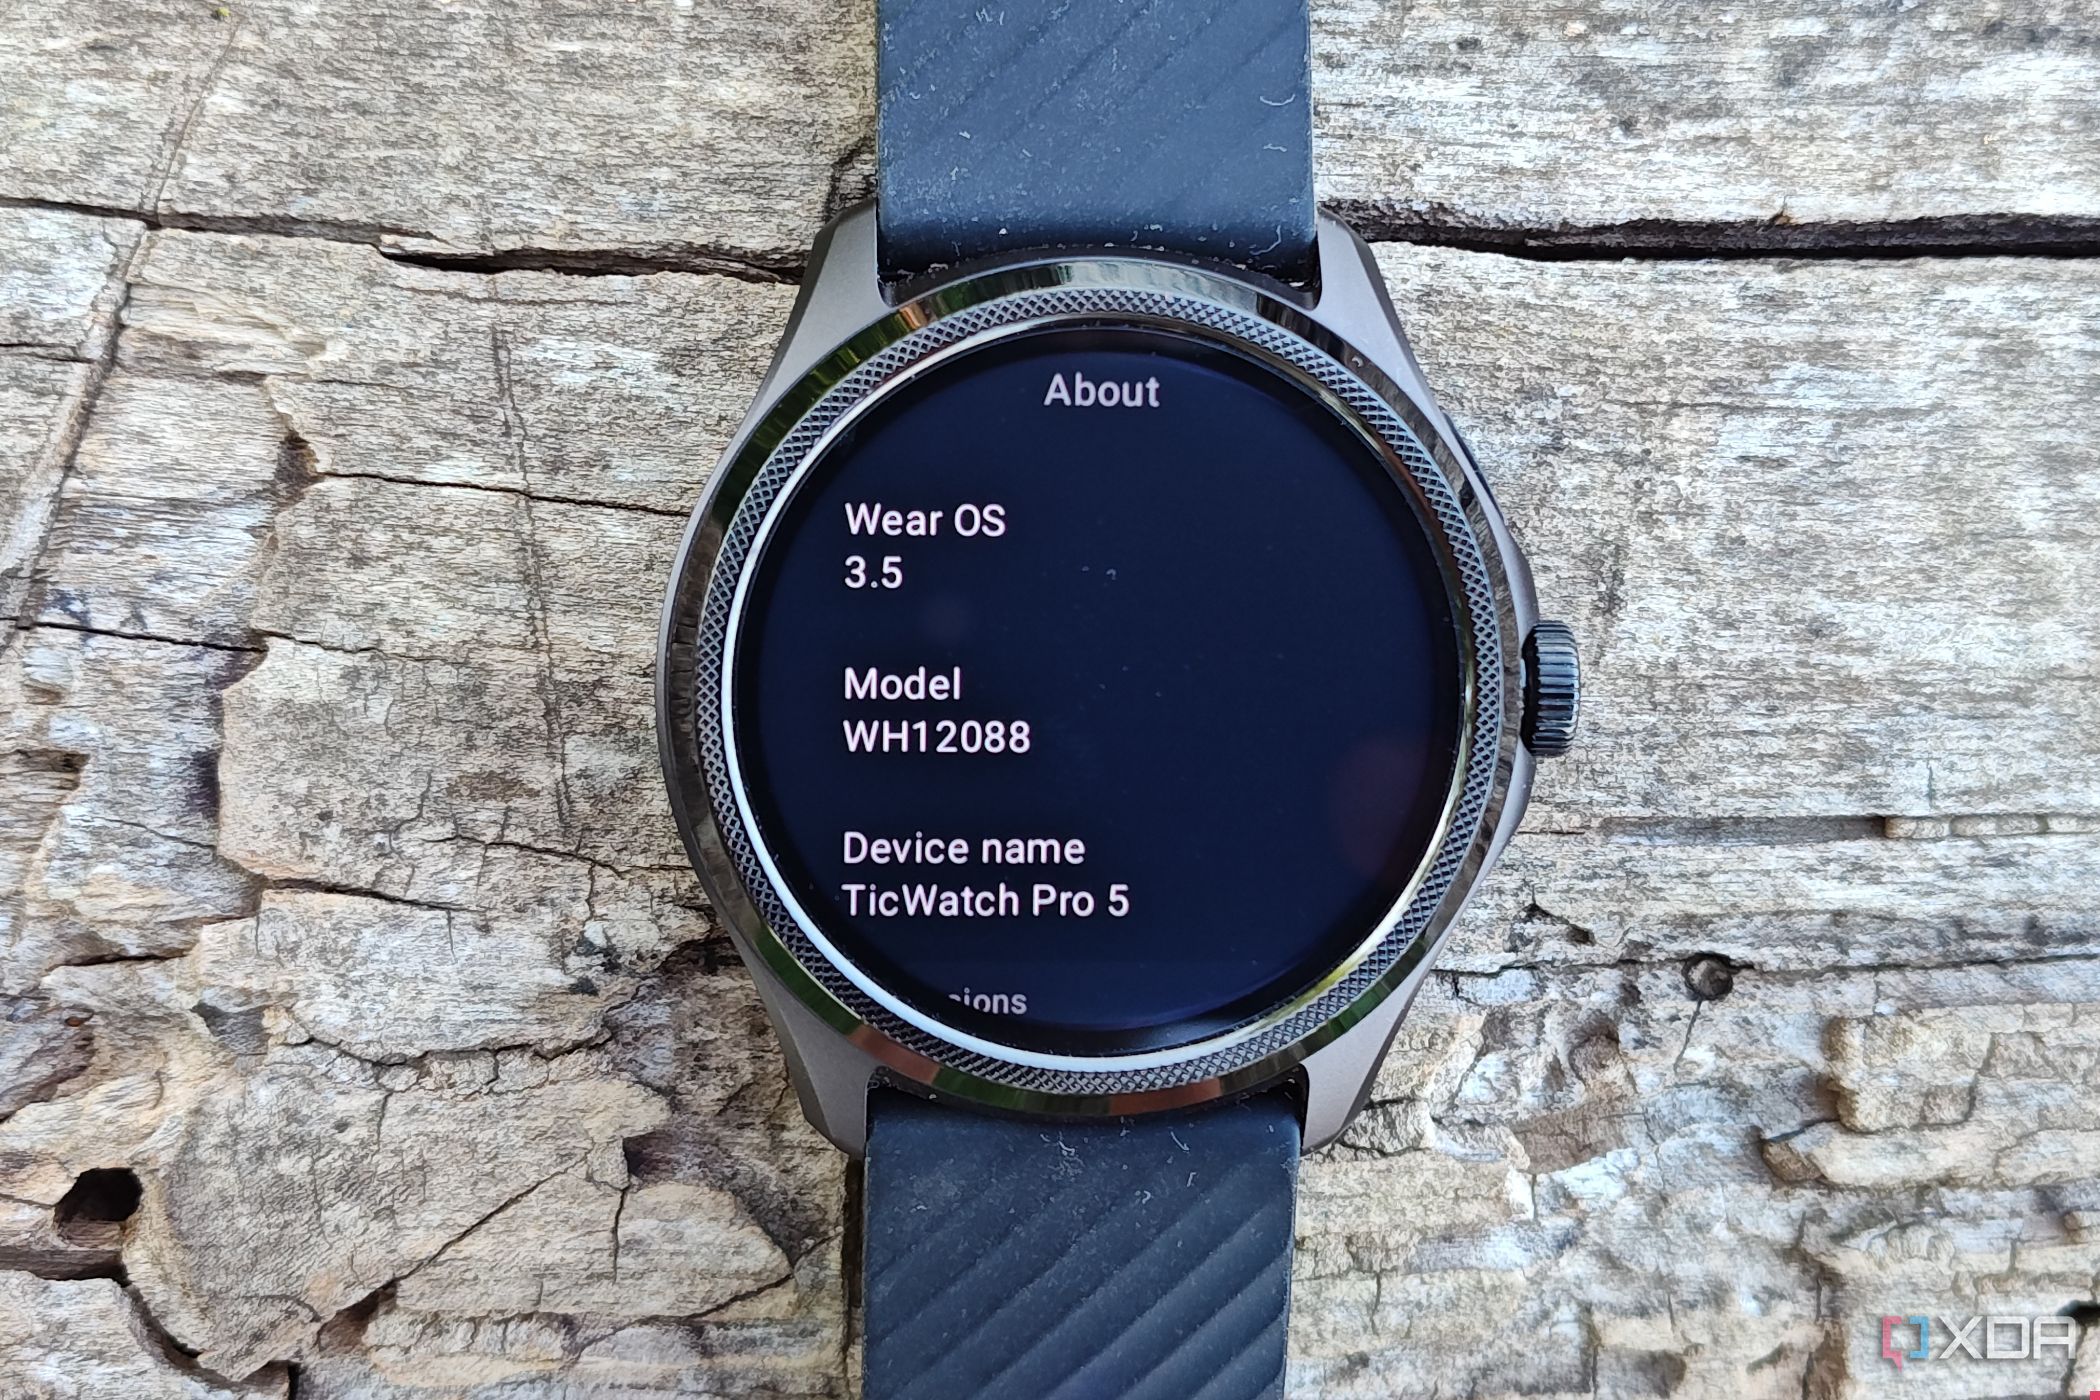 Mobvoi TicWatch Pro 5 shows the software version